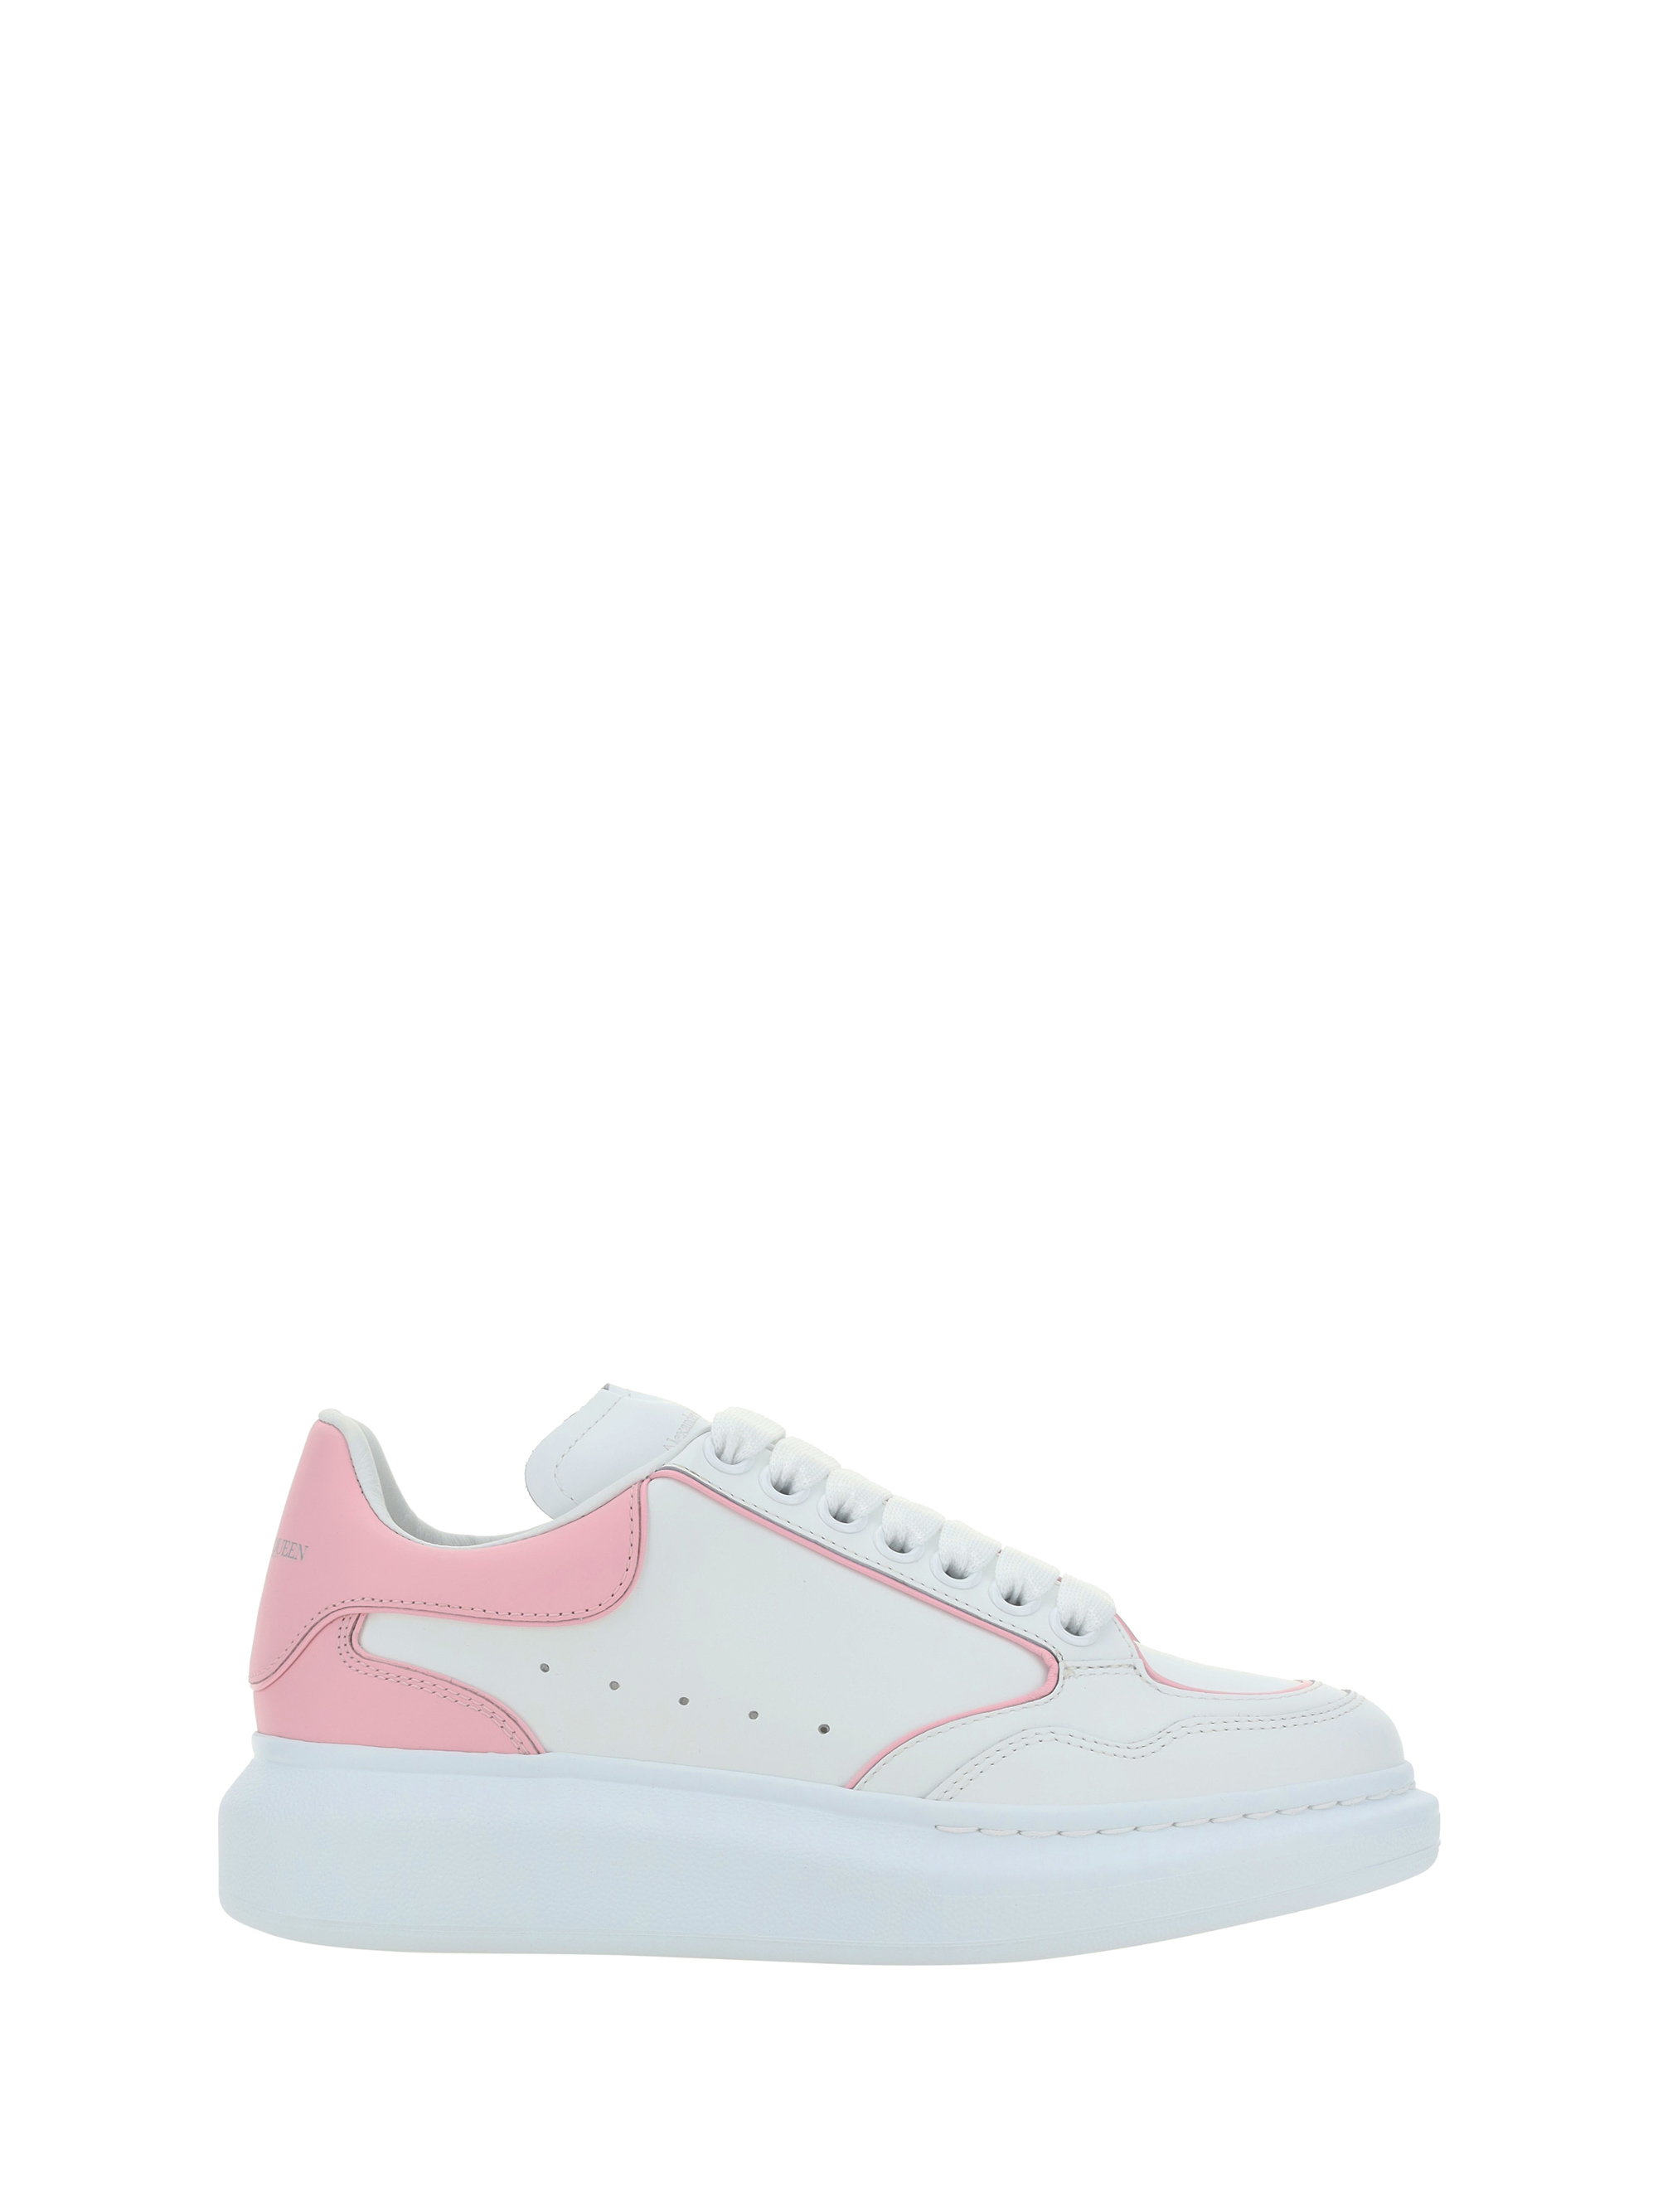 Alexander Mcqueen Sneakers In White/pale Pink